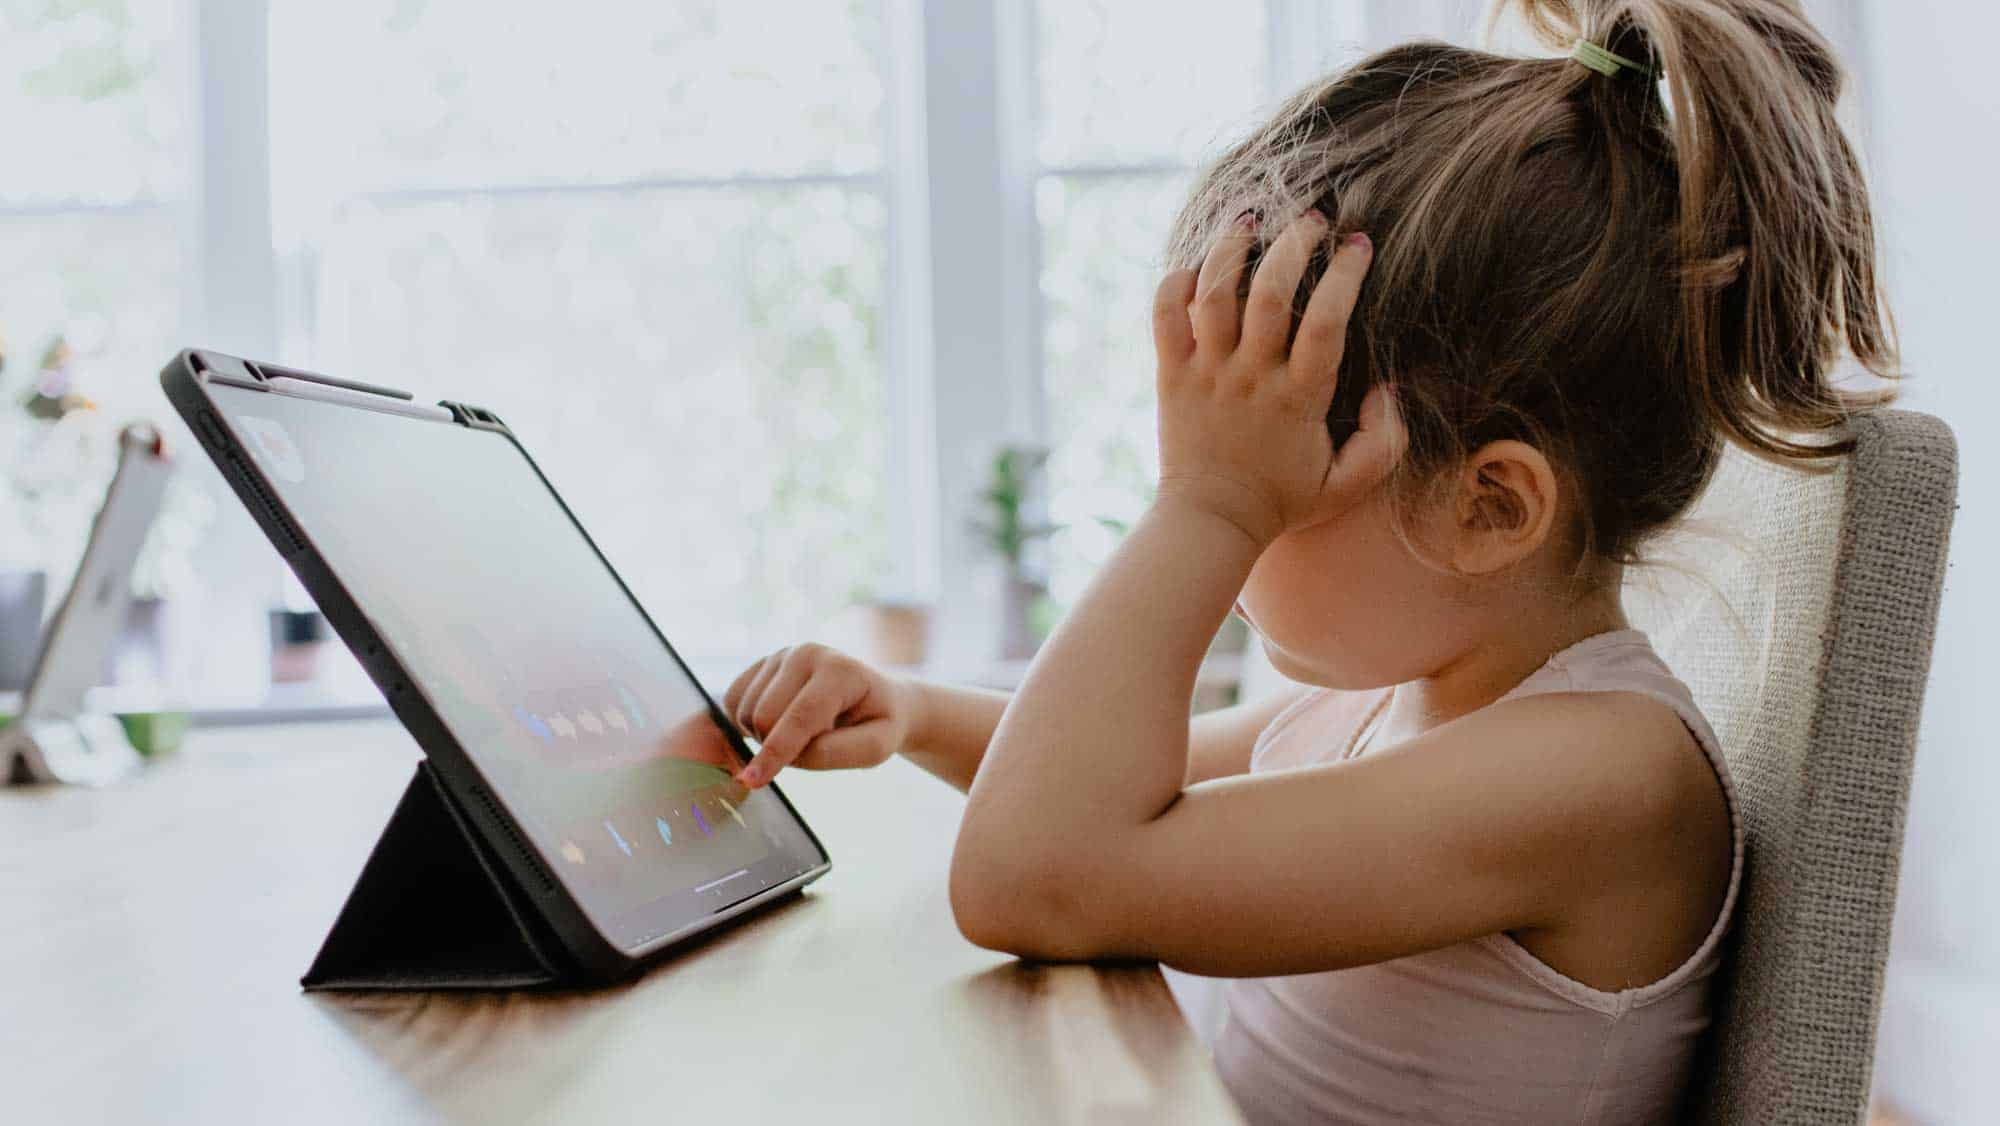 Little girl looking bored at a screen - the mental health impact of Covid-19